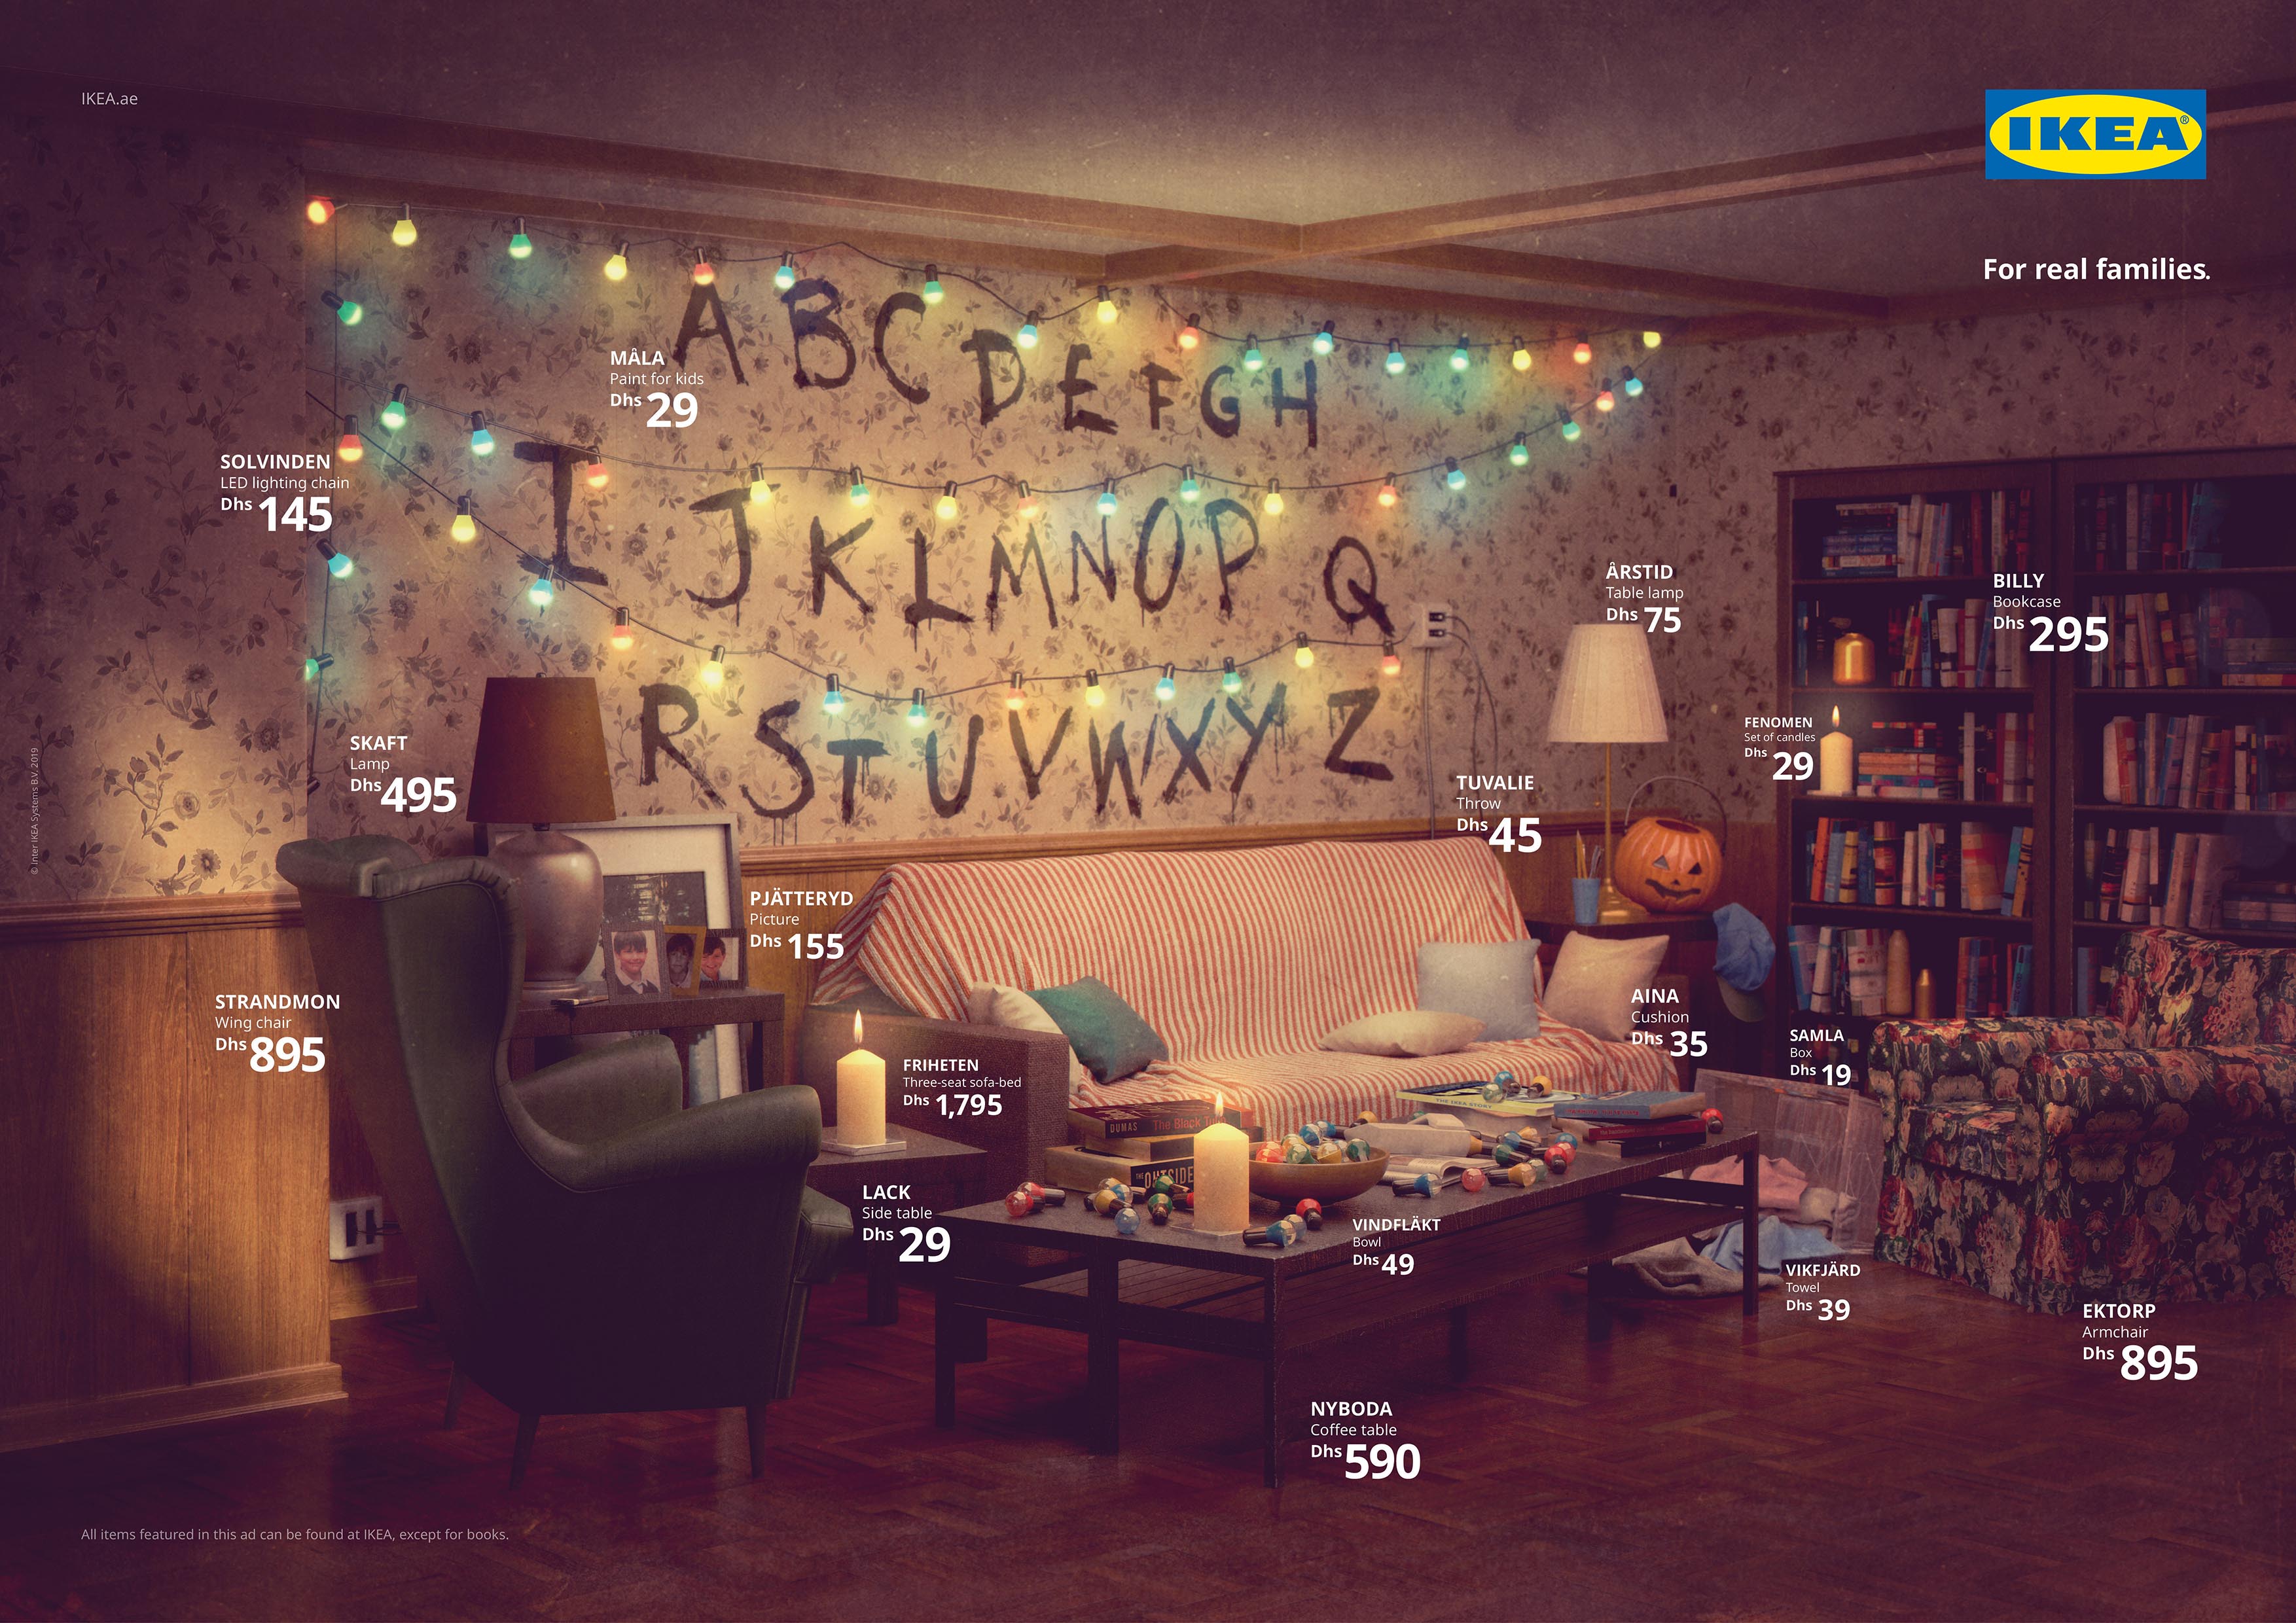 IKEA - Stranger Things - Publicis